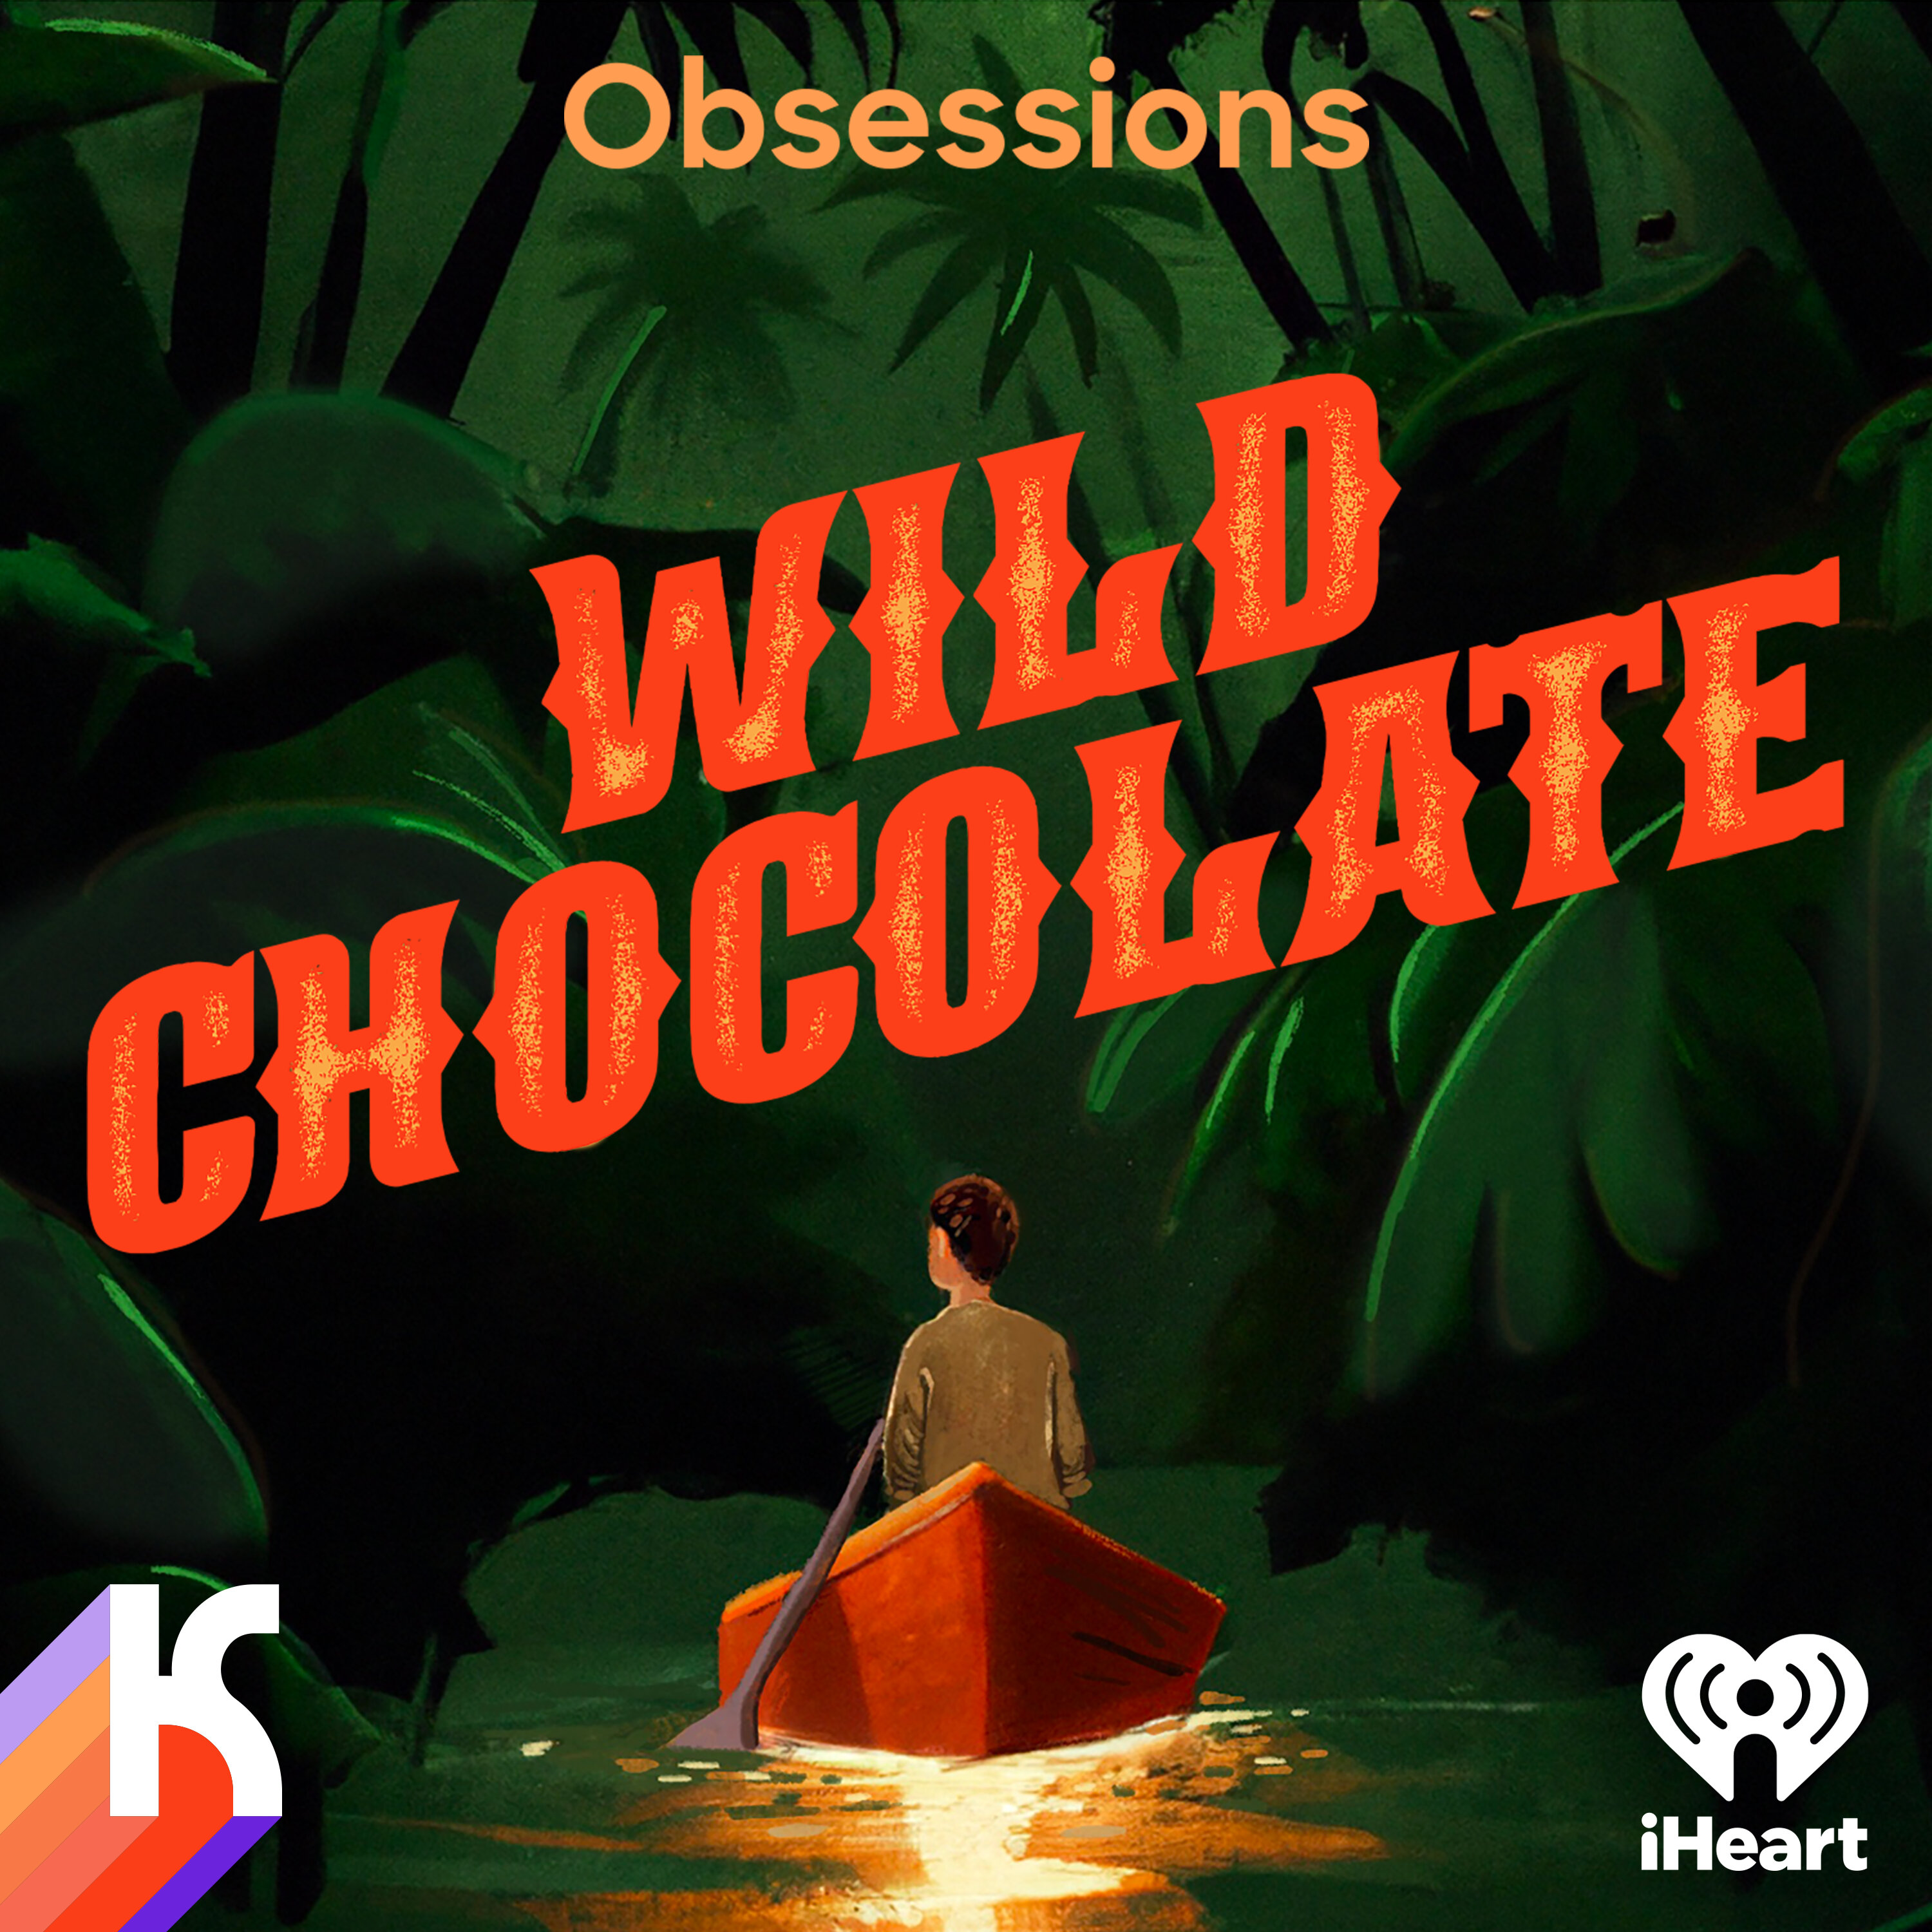 OBSESSIONS: Wild Chocolate podcast show image